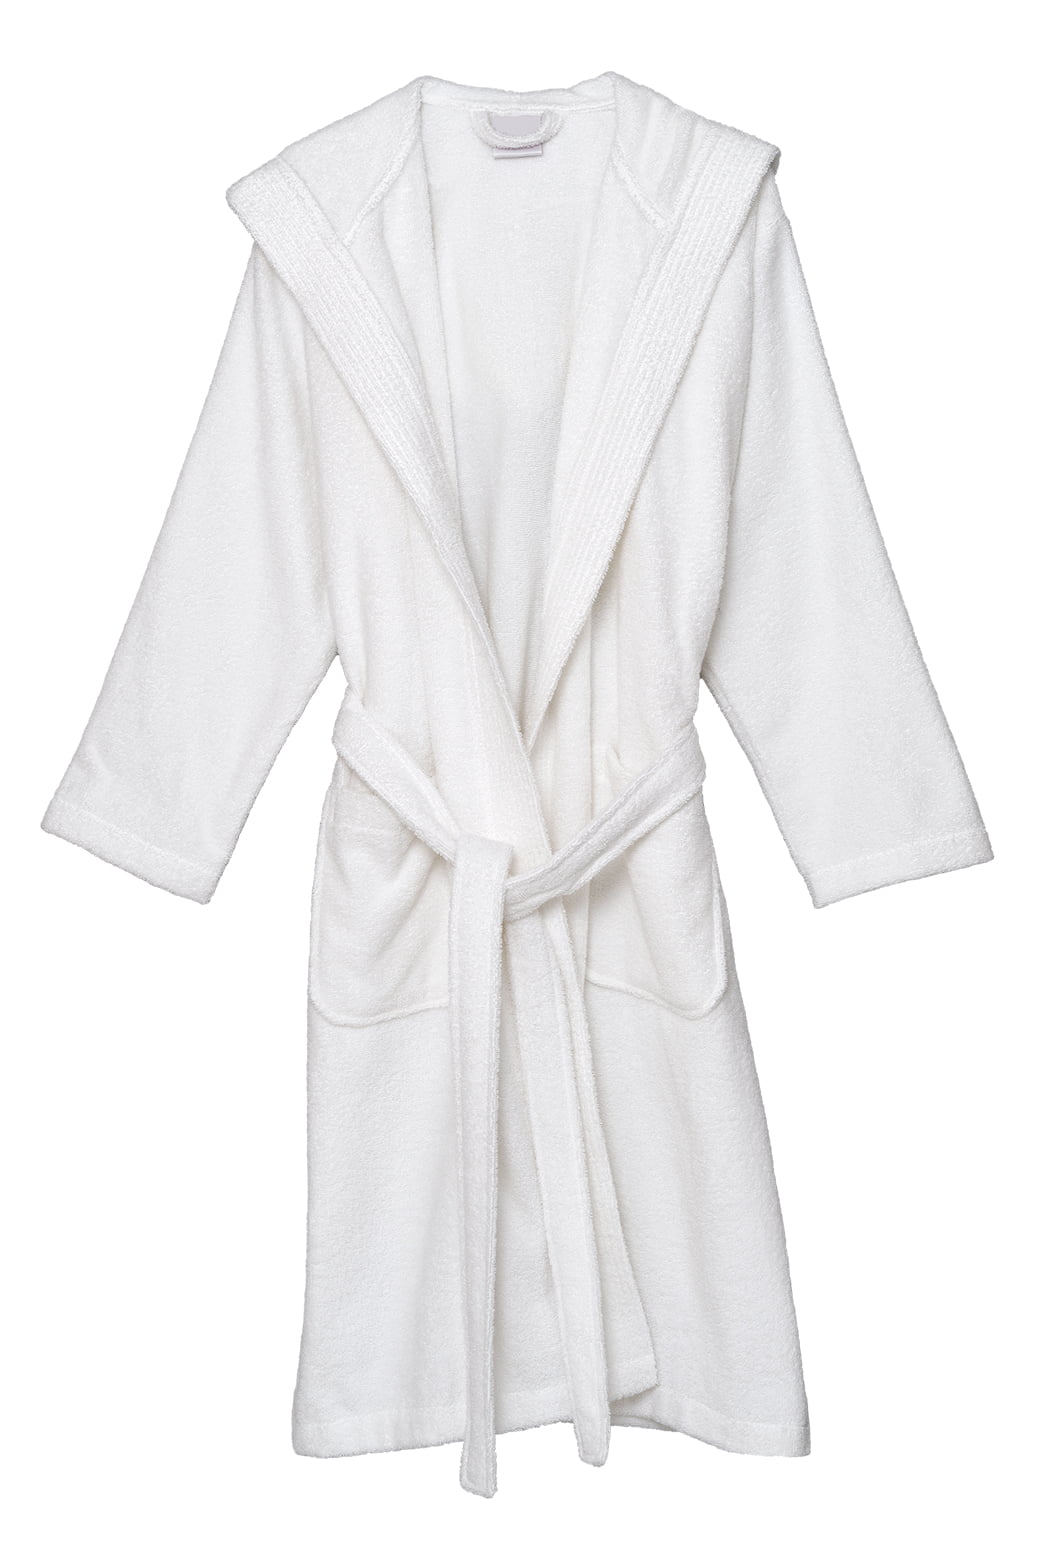 TowelSelections - TowelSelections Women's Hooded Robe, Cotton Terry ...